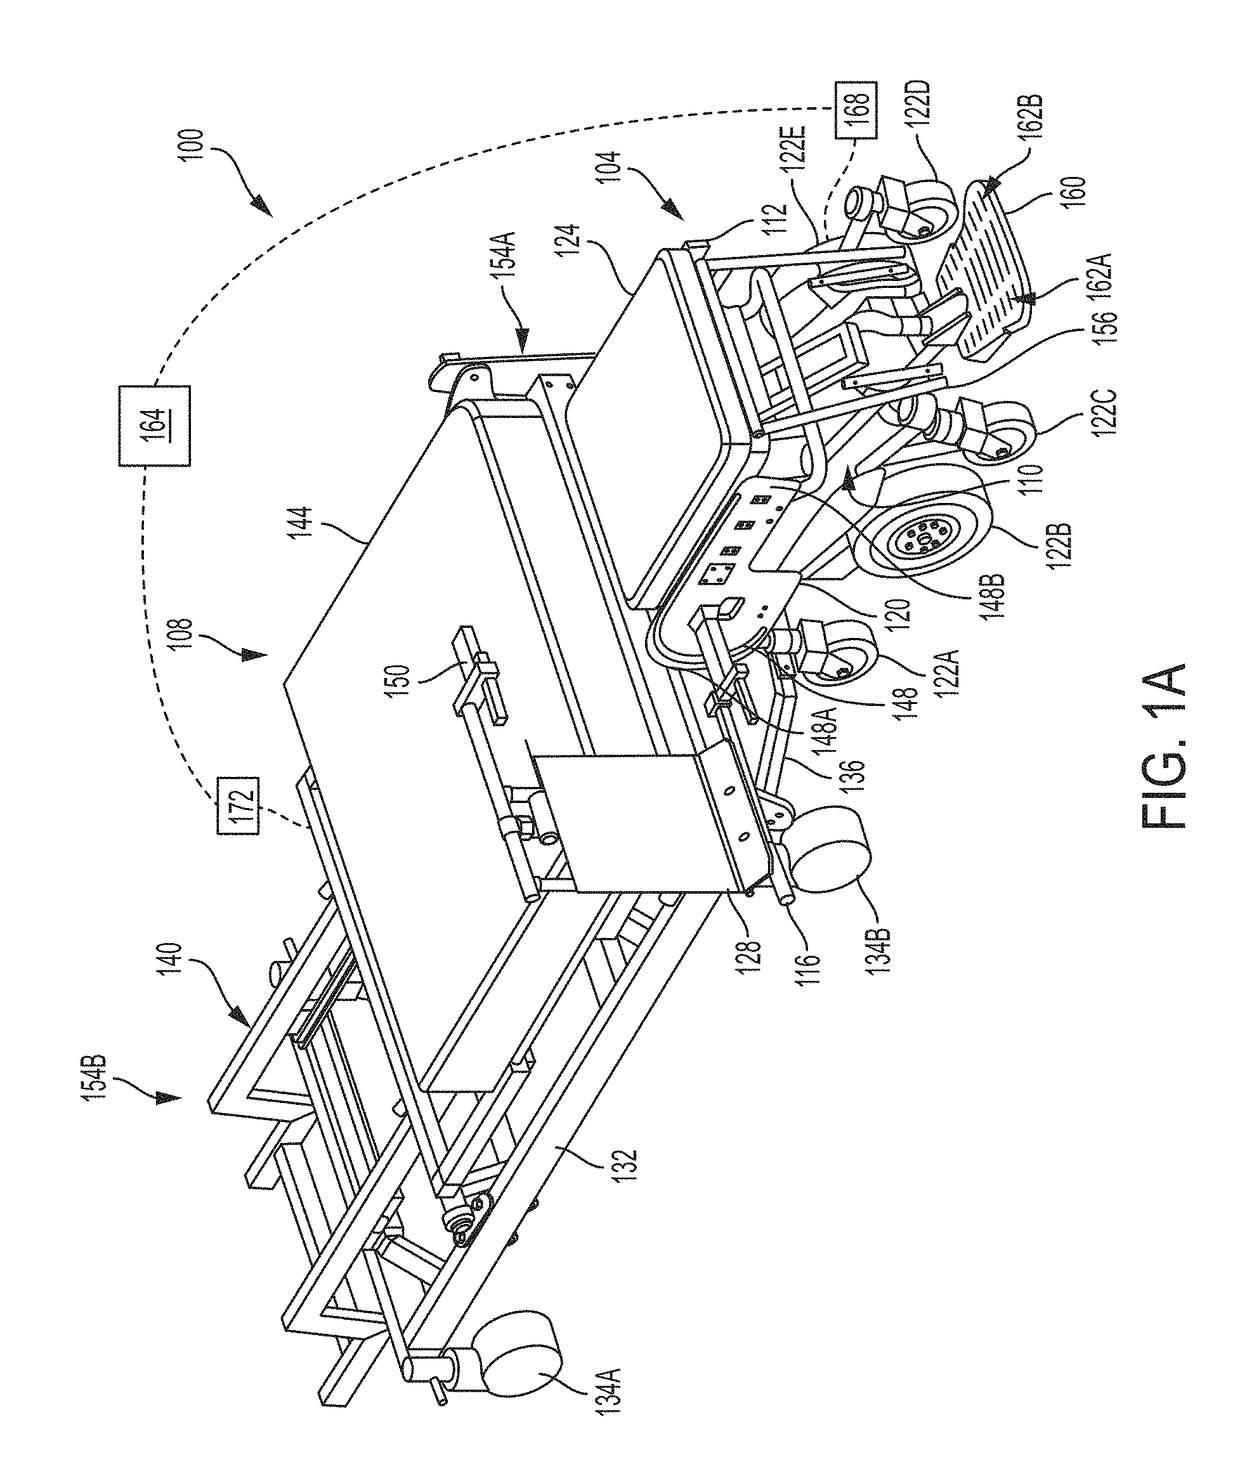 Systems and methods for powered wheelchair personal transfer